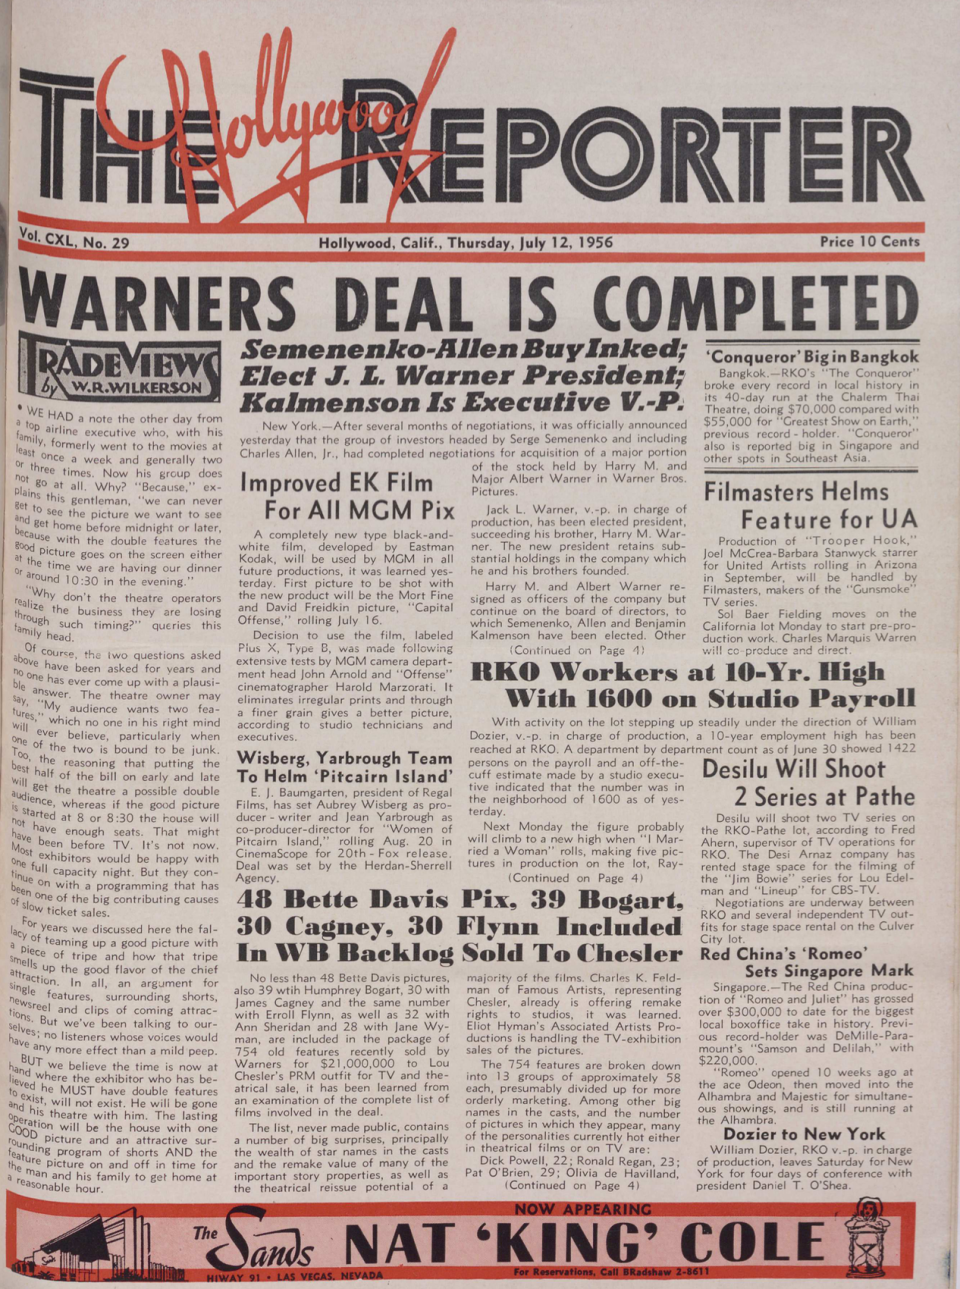 A sealed deal marked in the July 12, 1956 issue of <em>The Hollywood Reporter</em>.